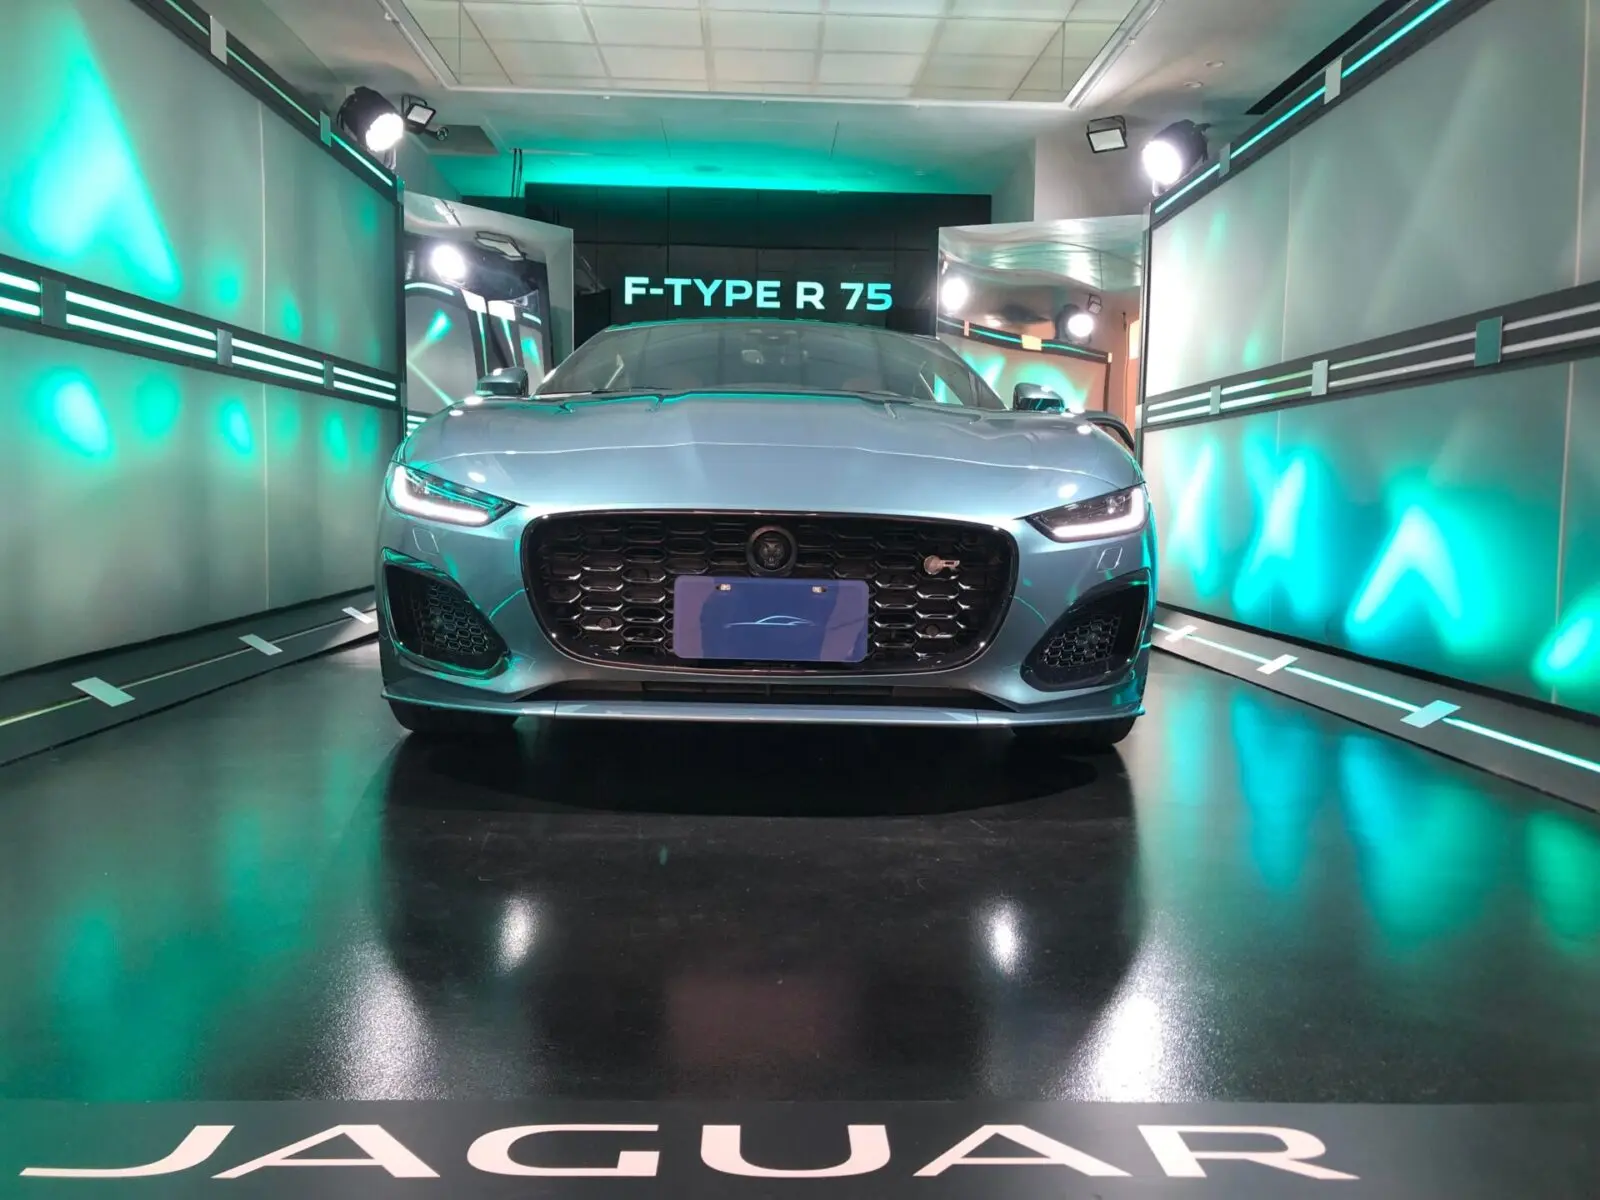 Jaguar F-TYPE R 75 with 5.0-liter V8 engine, officially unveiled in Taiwan